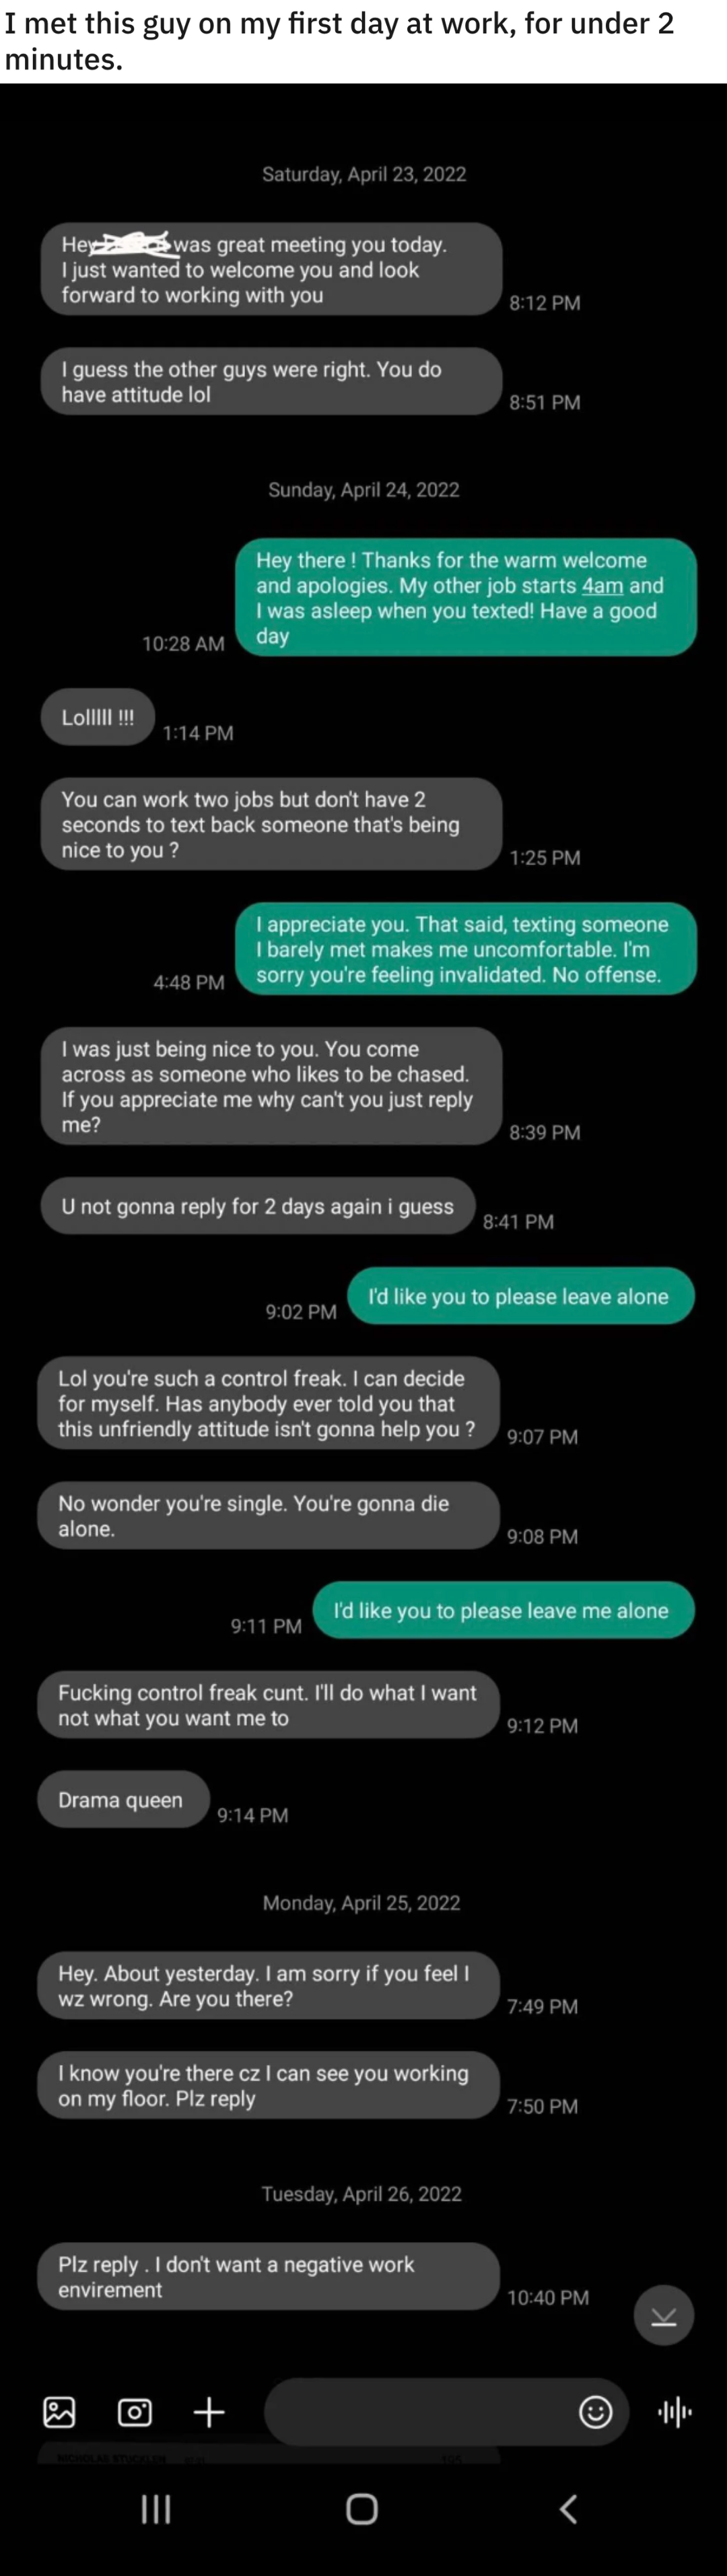 A man texts and then gets angry when the woman has not responded within 30 minutes, the woman asks him to stop, and he calls her a &quot;control freak cunt&quot;